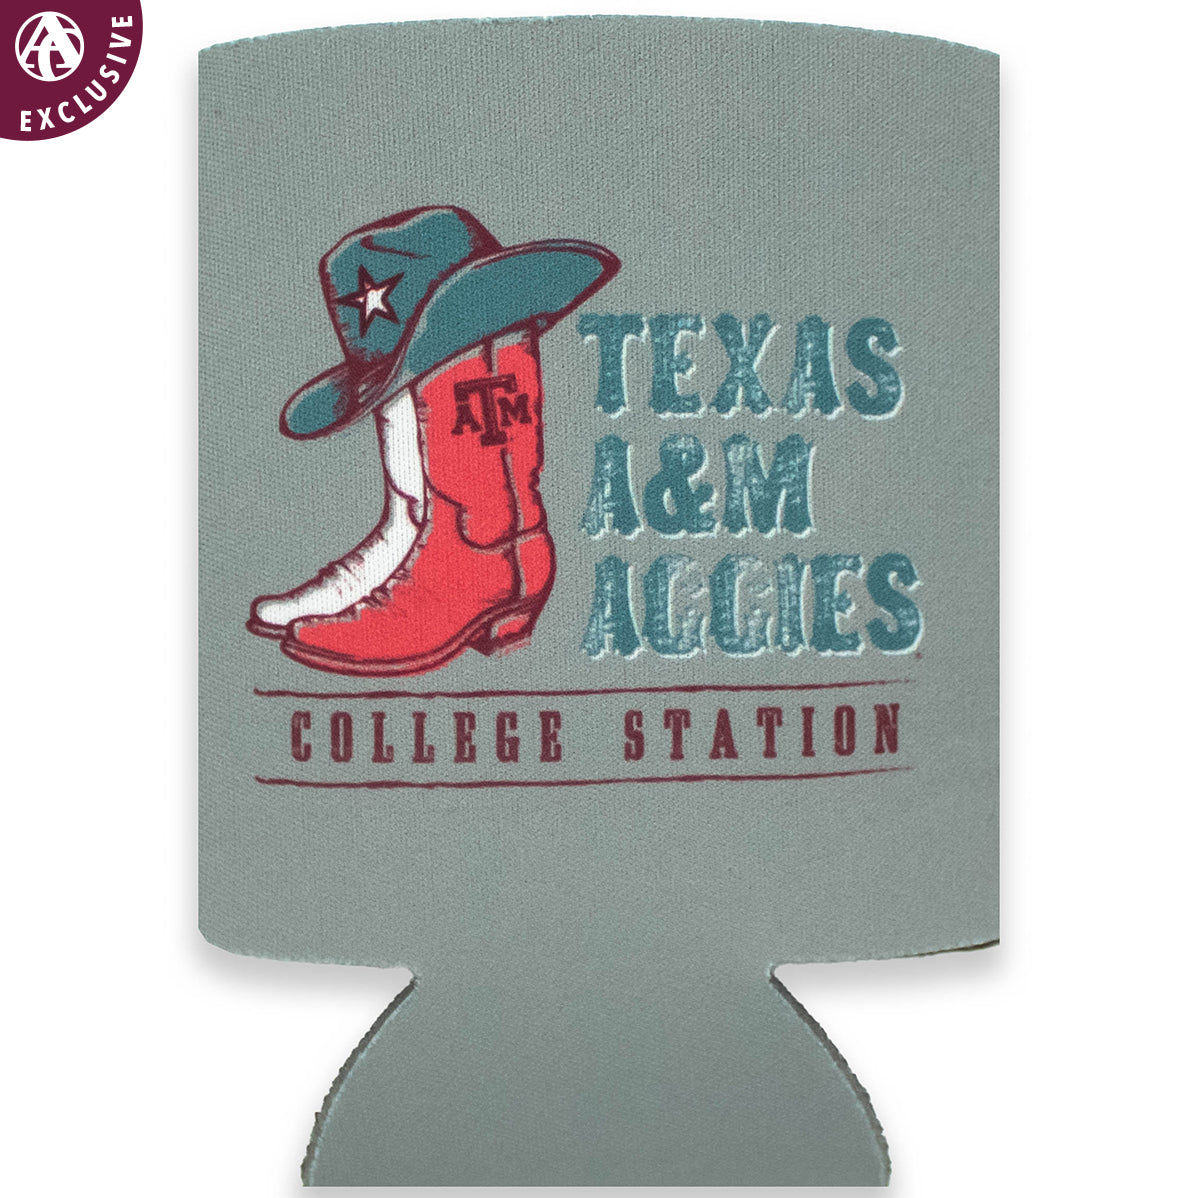 Men's Footwear - Aggieland Outfitters